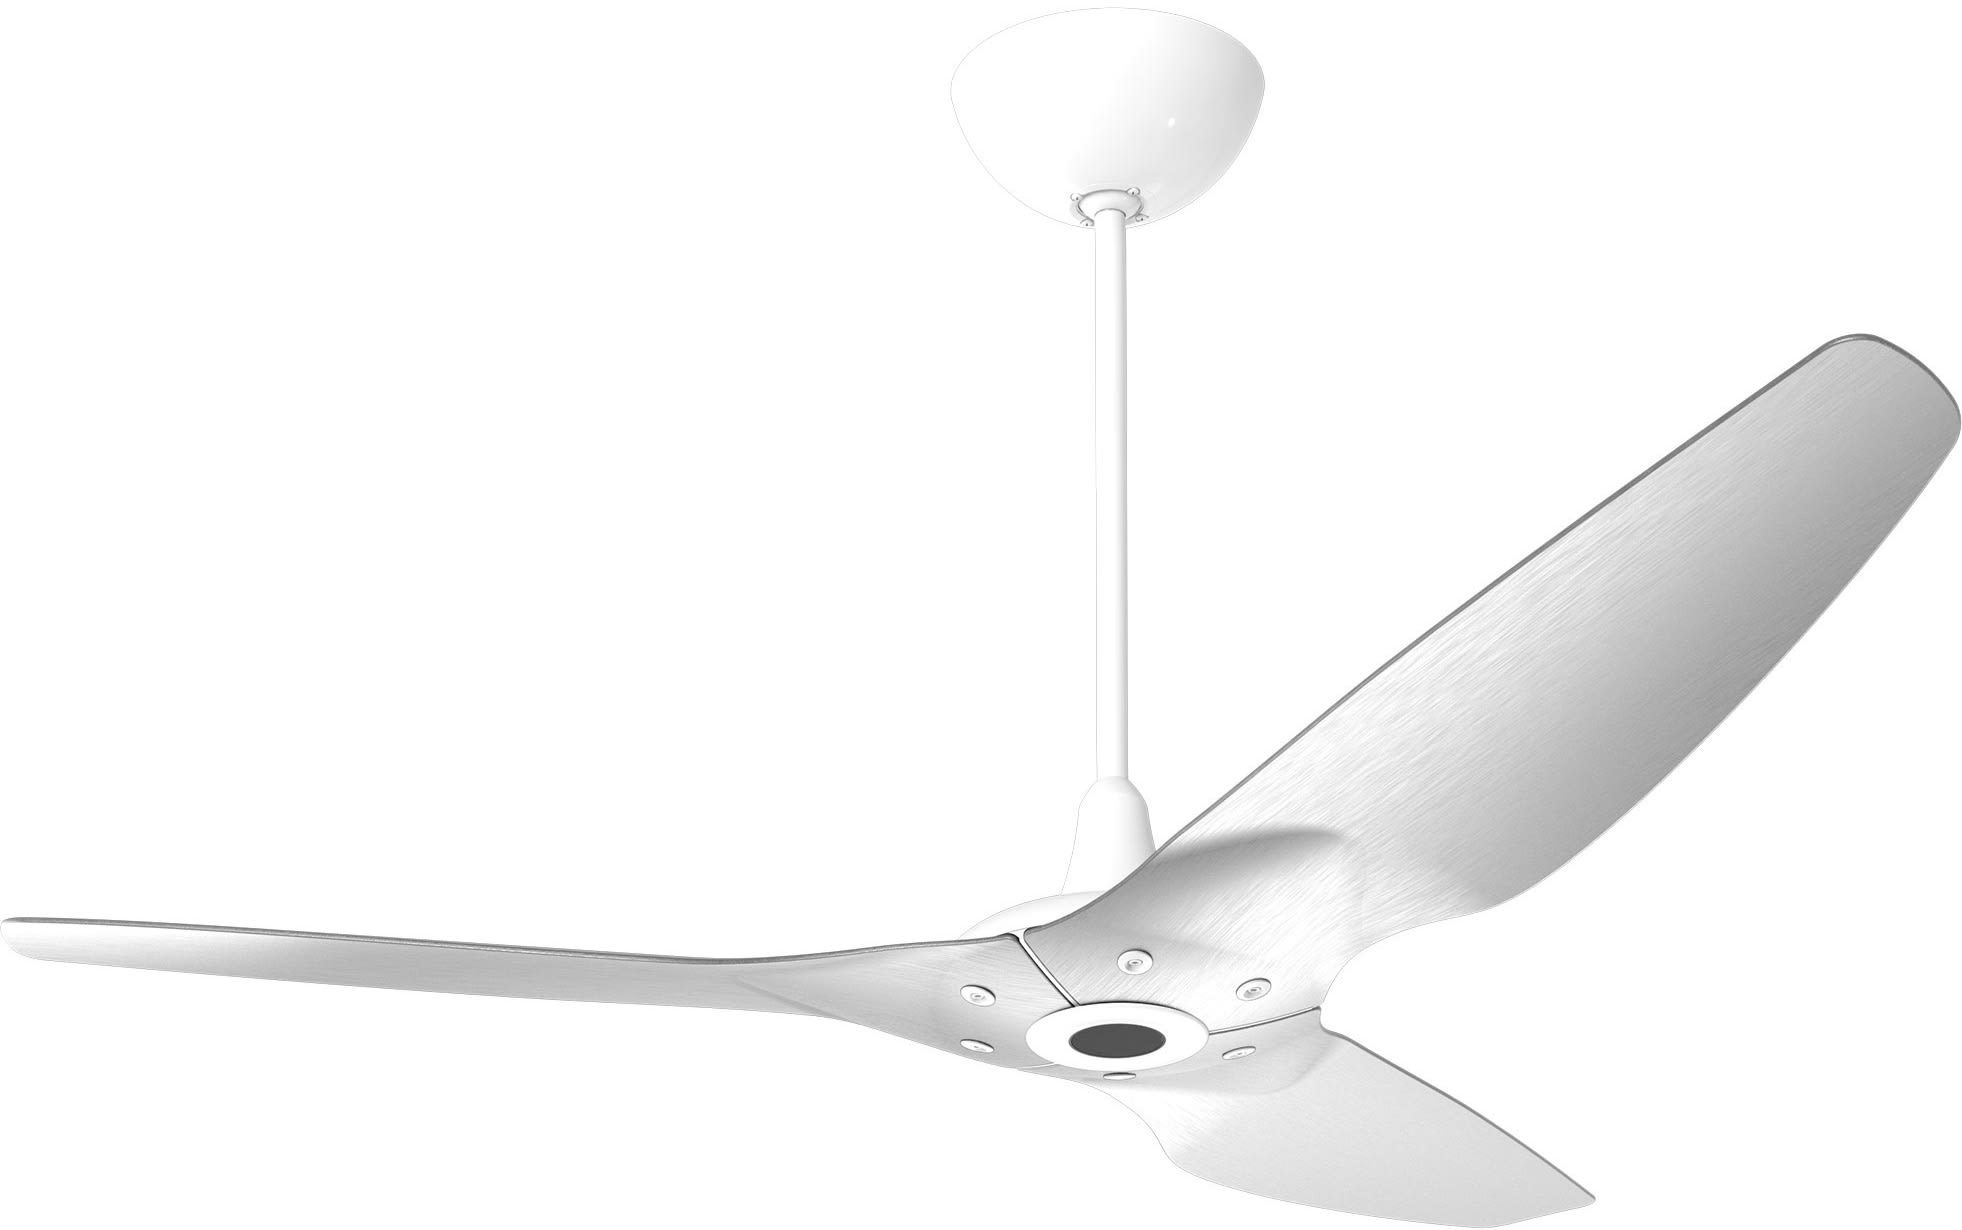 Big Ass Fans Fr150a U0f10 3h03 02259 531p010 Brushed Aluminum Haiku 60 Universal Mount 3 Blade Outdoor Ceiling Fan With Remote Control And White Motor Body Lightingdirect Com